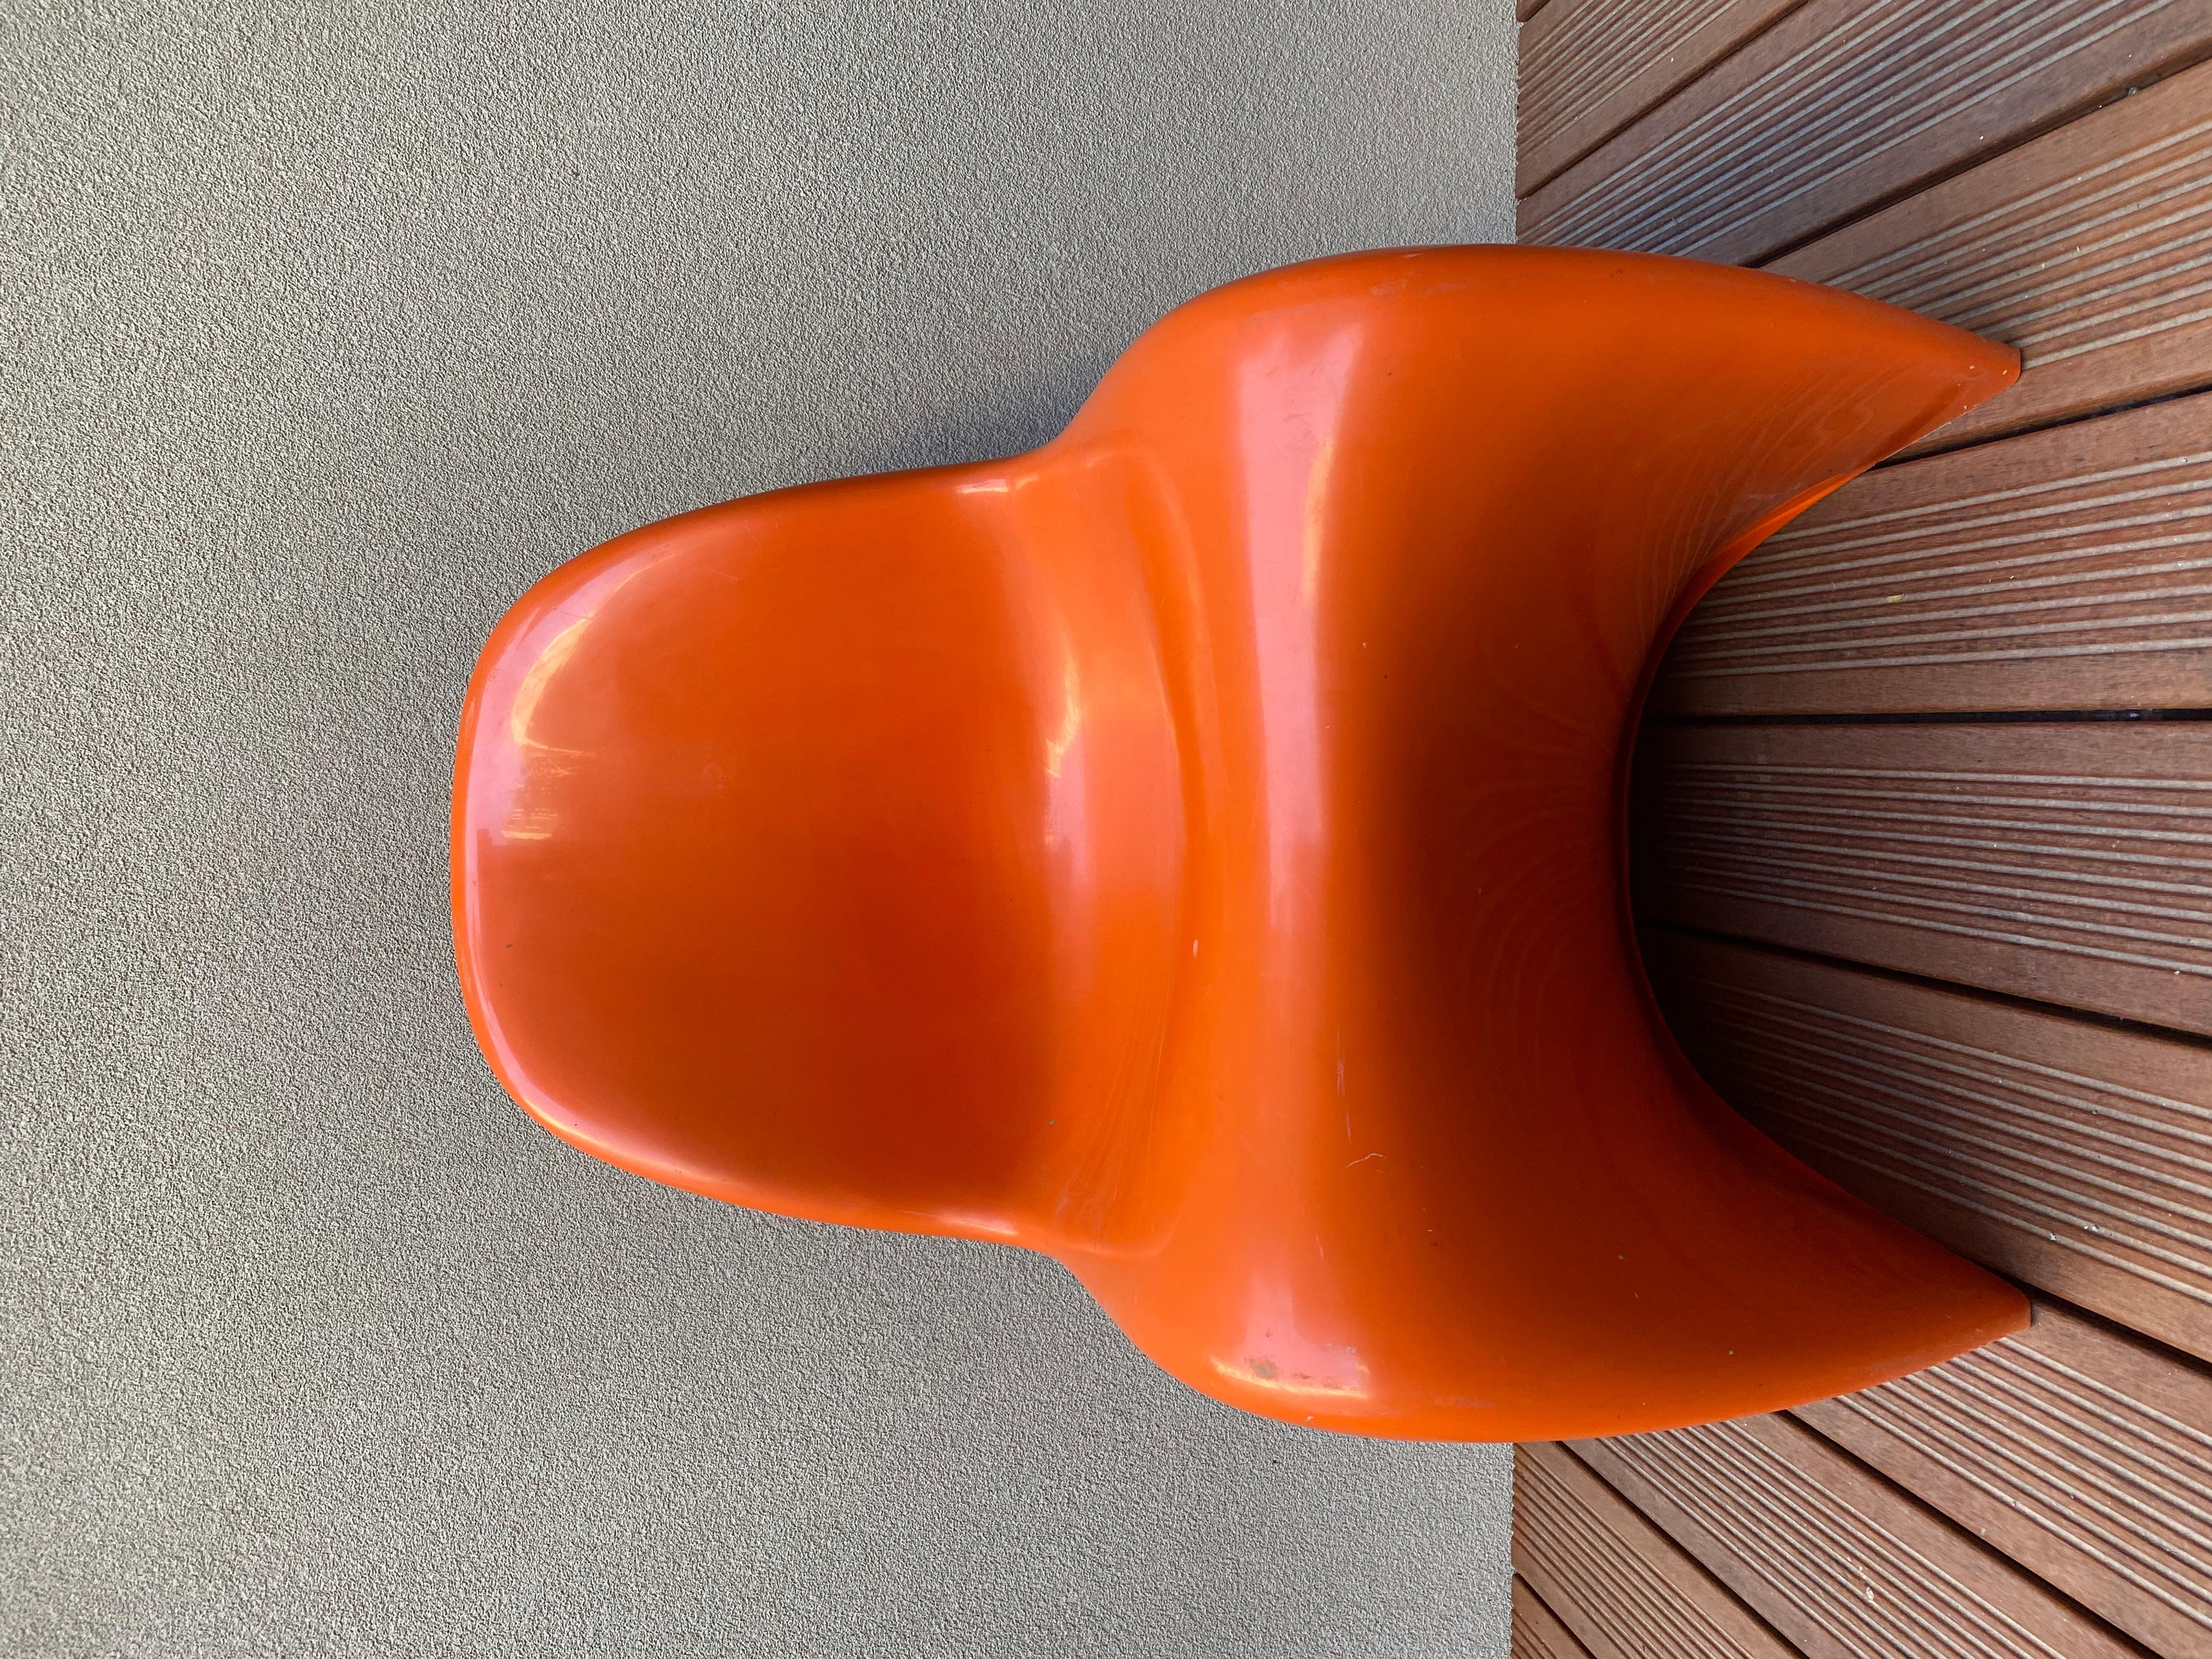 In August 1967 the Panton chair was presented to the public for the first time.
Since than it has been considered the icon design of the 20th century

This chair is made of coloured thermoplastic polystyrene
it is made out of a single section of